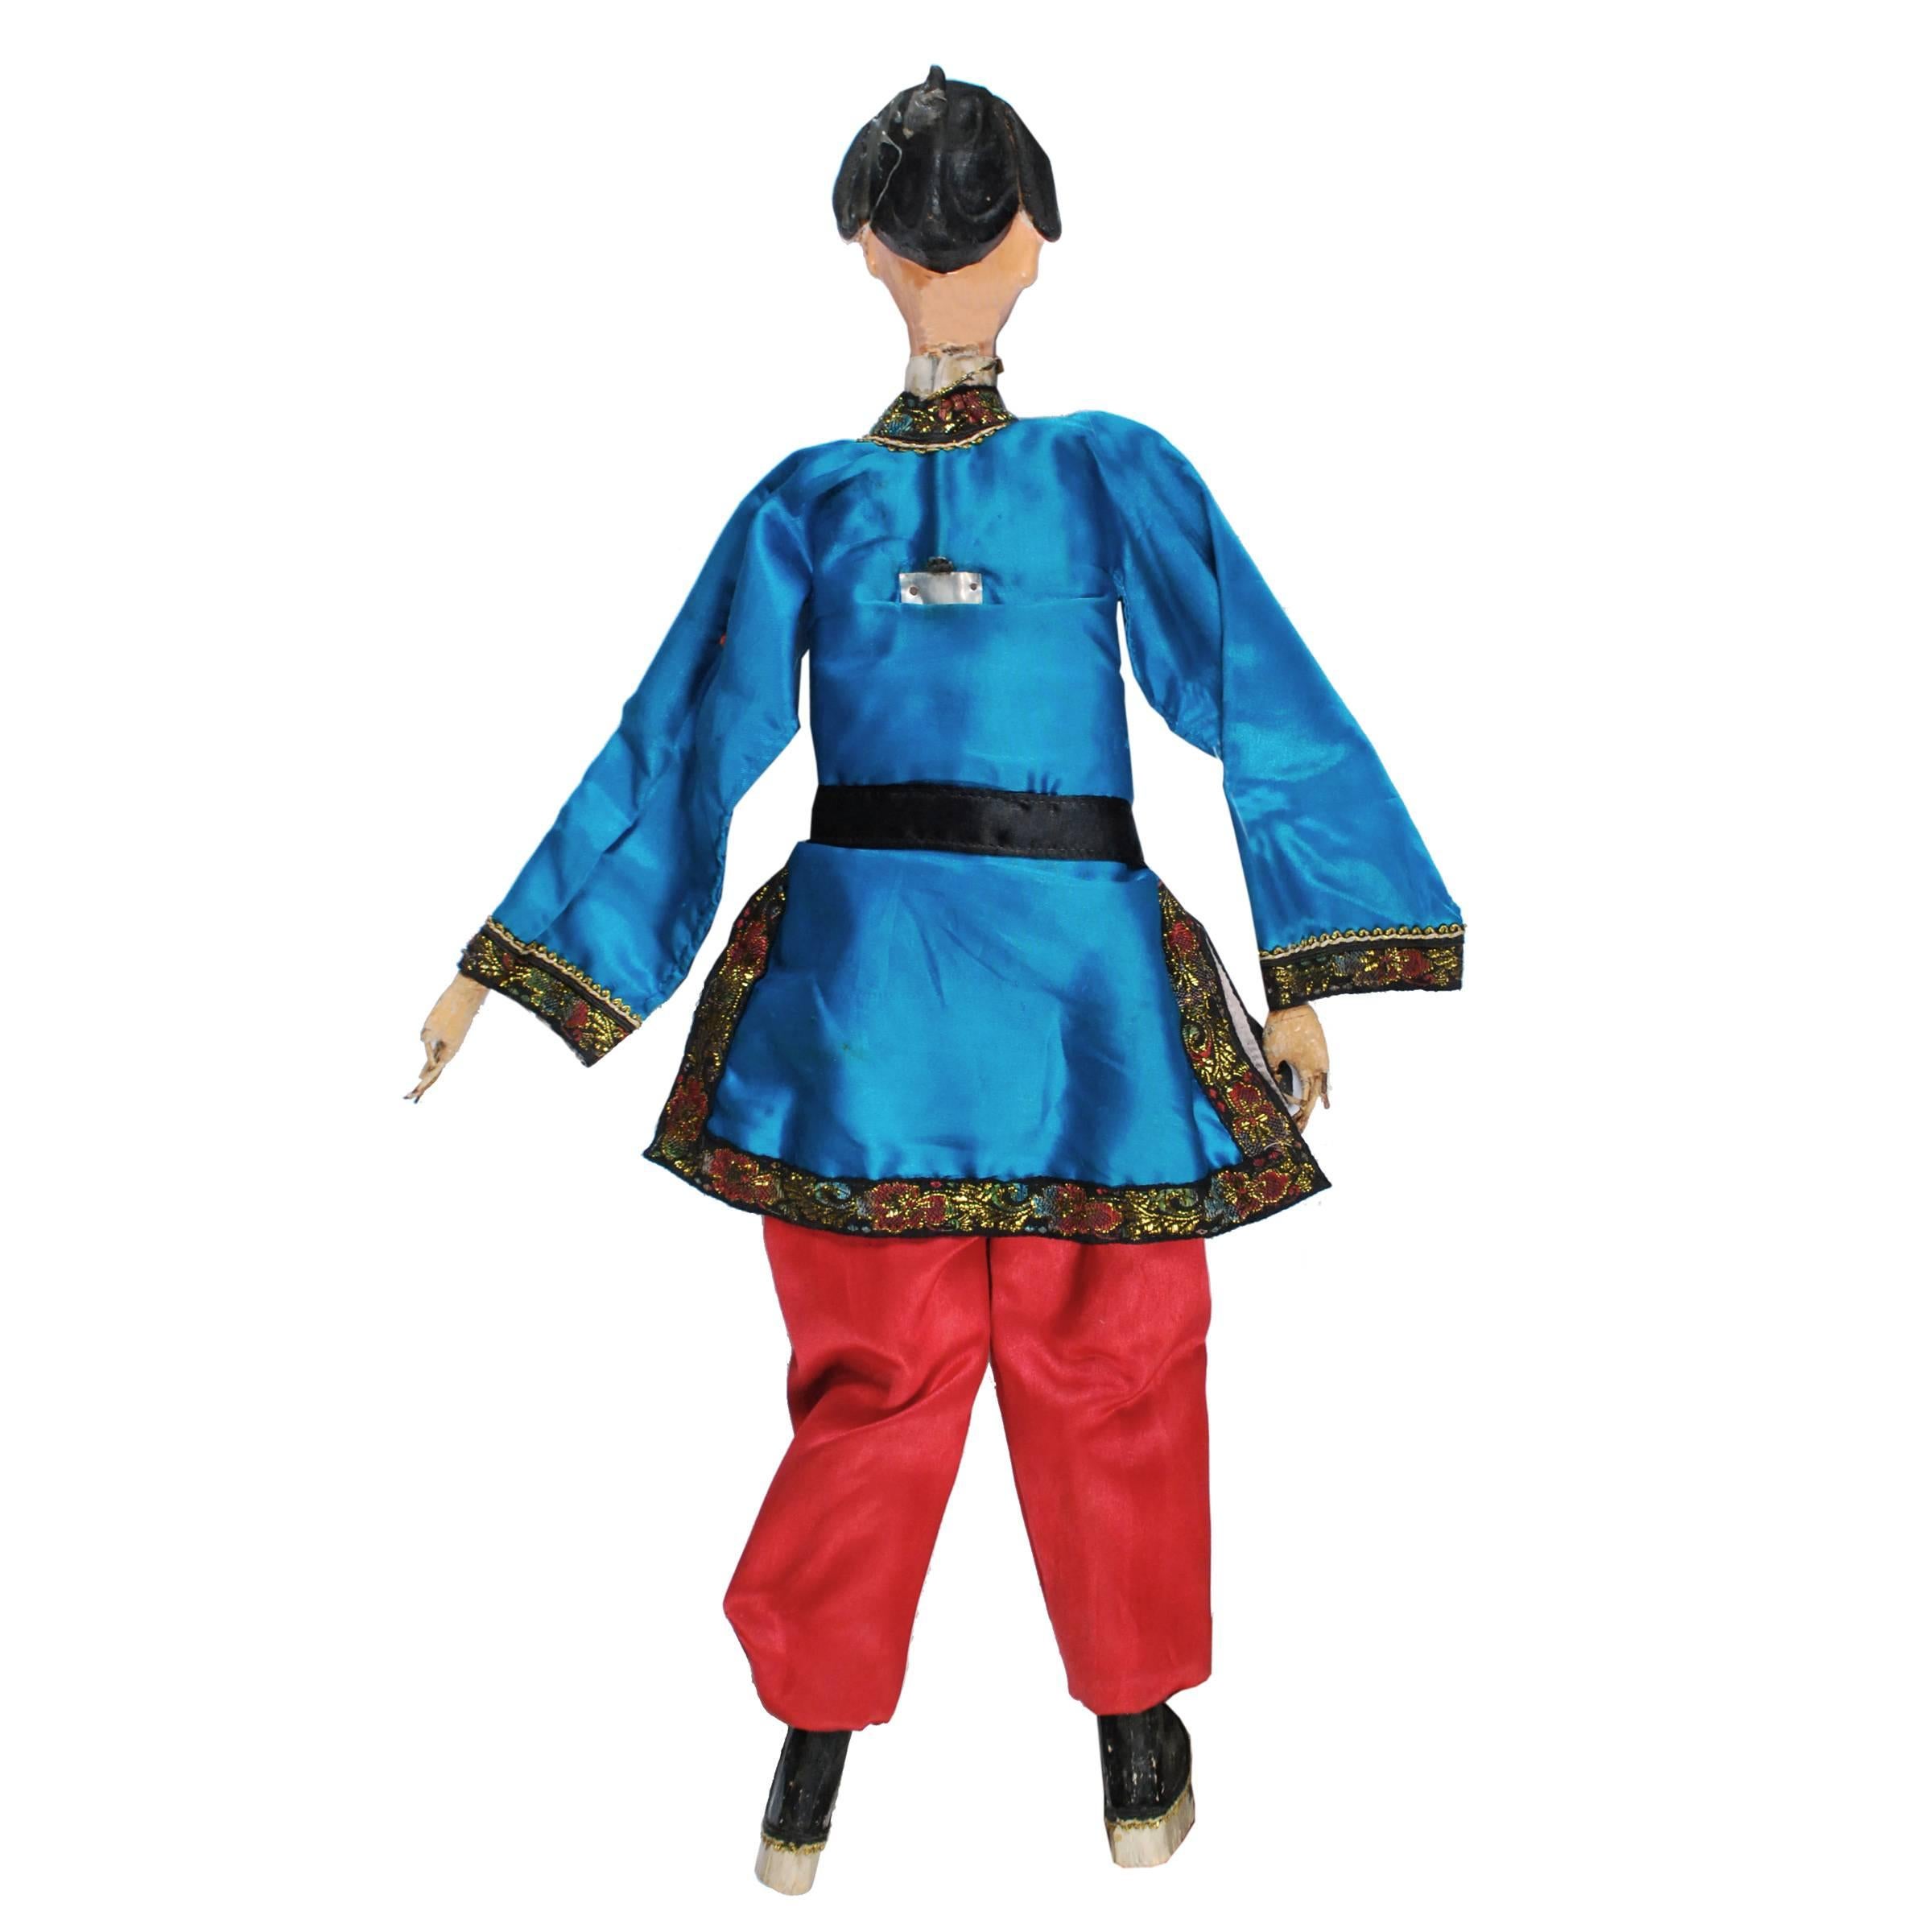 Hand puppets, like this one from China’s Zhejiang region, have been a popular form of entertainment for centuries. In the late 19th early-20th century this tiny robed gentleman probably entertained throngs of people as he strolled the courtyards of